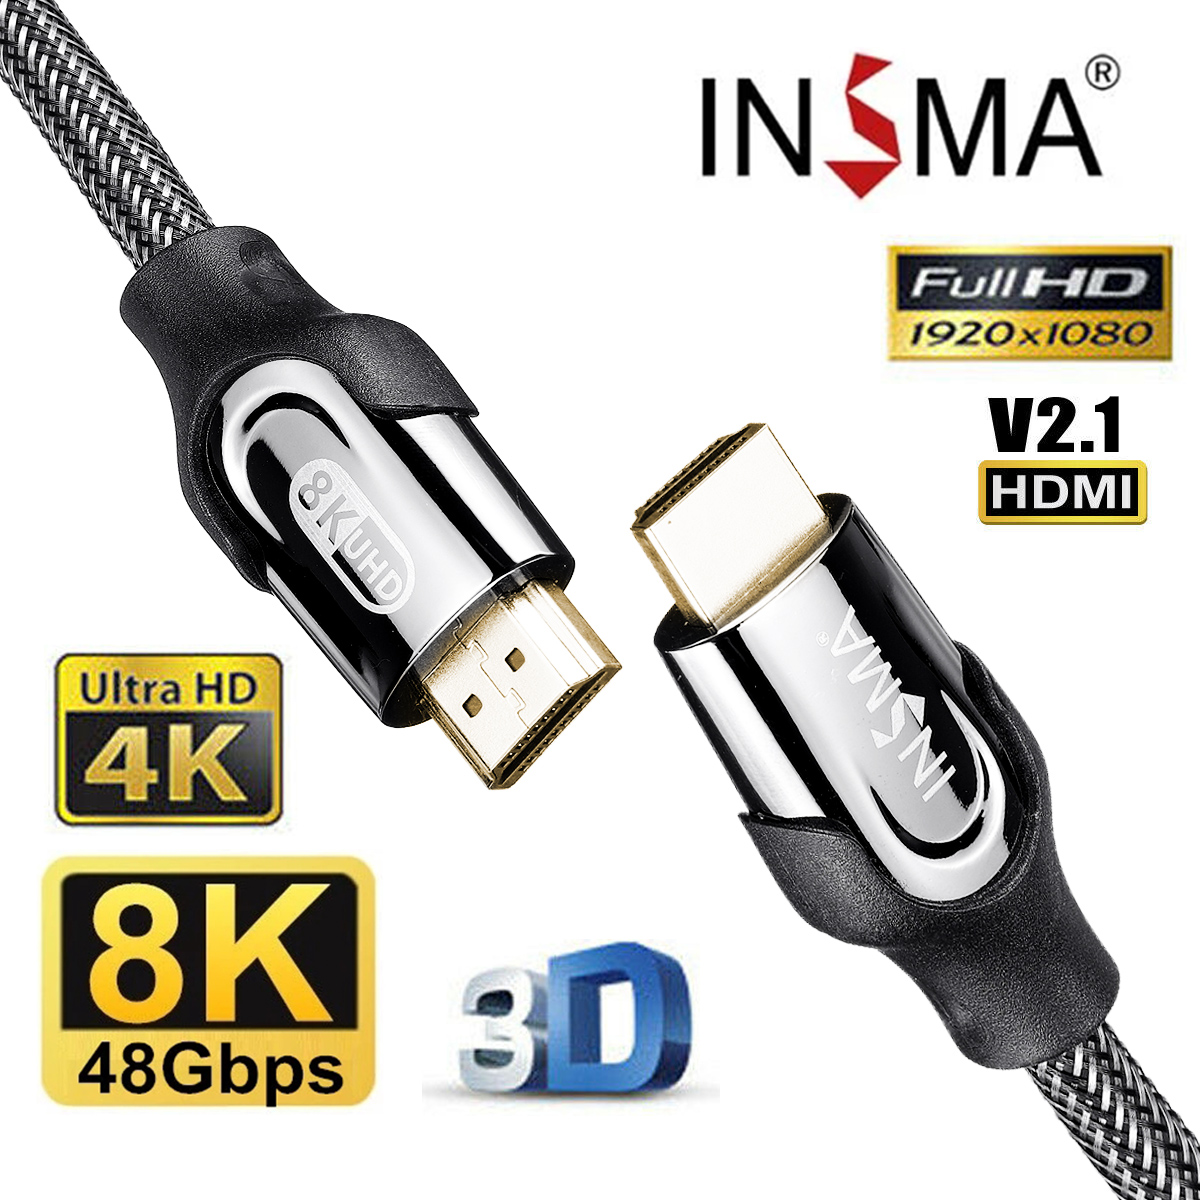 INSMA 8K HDMI 2.1 Cable 0.5/1/1.5/2/3m HDMI Male to HDMI Male Cable 1080P 8K 60HZ 48Gbps Gold Plated Connector